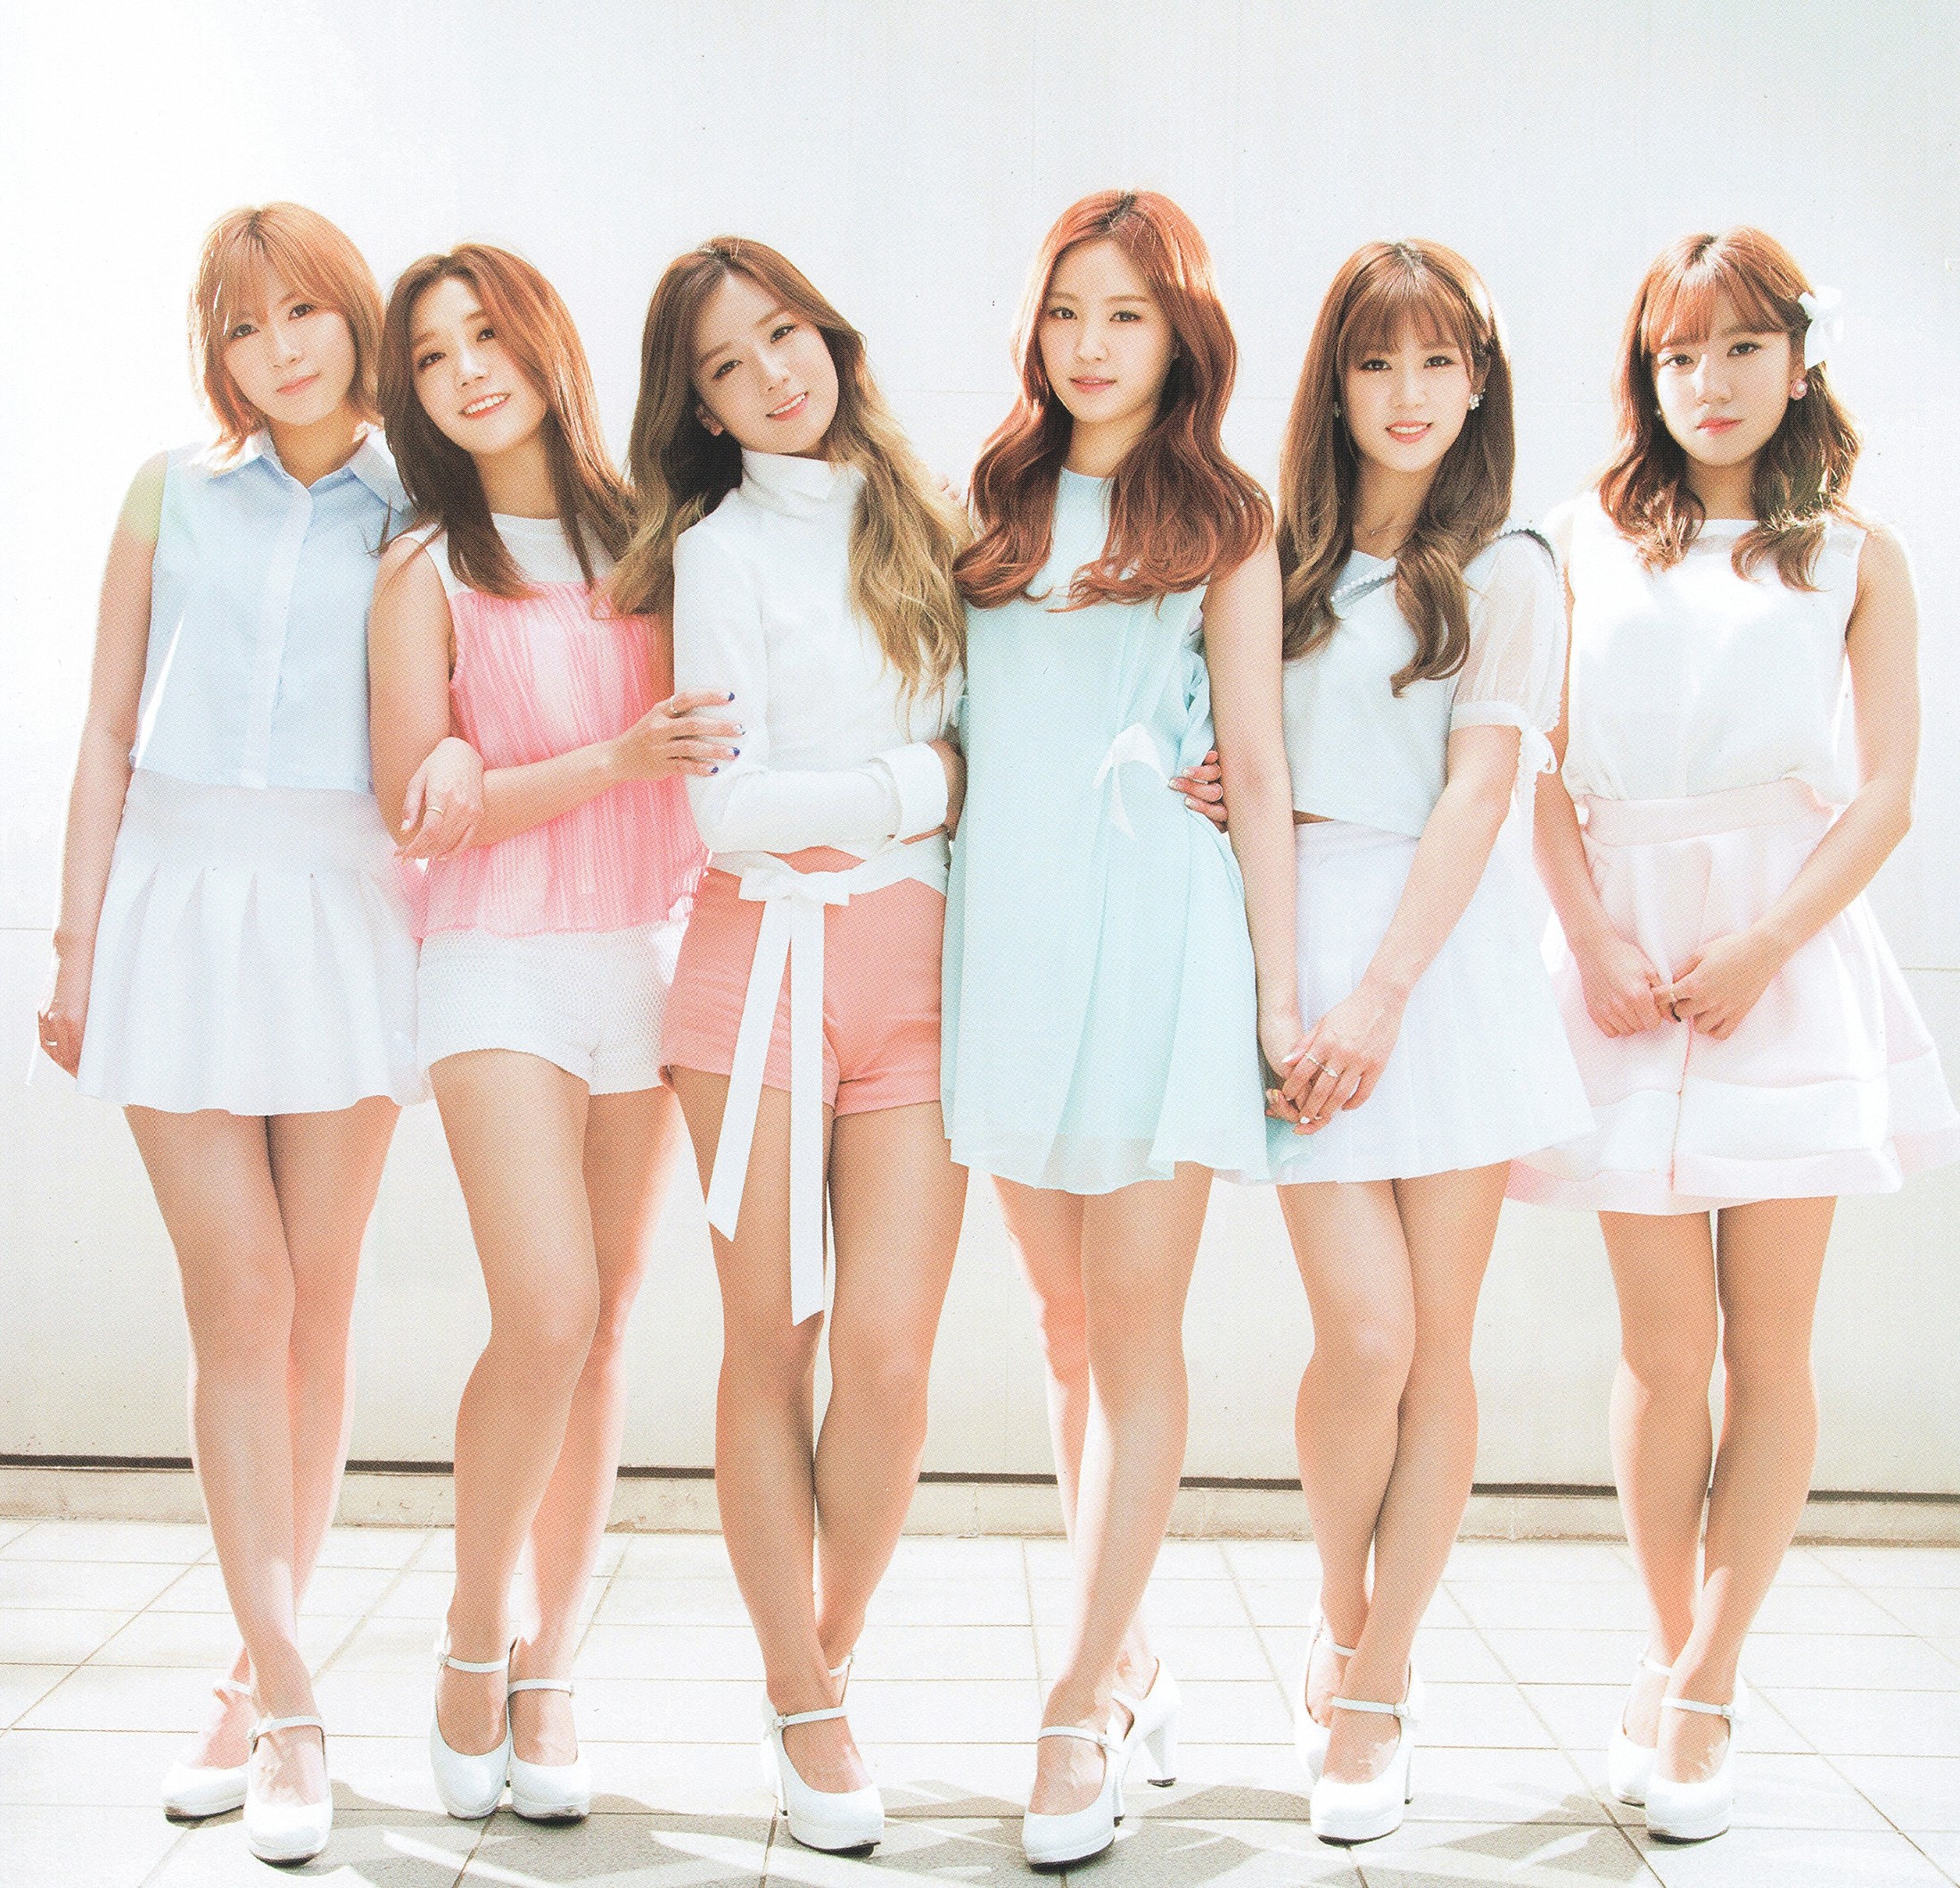 #APINK: Fan Says He Sent Death Threats Because Group "Went On Blind